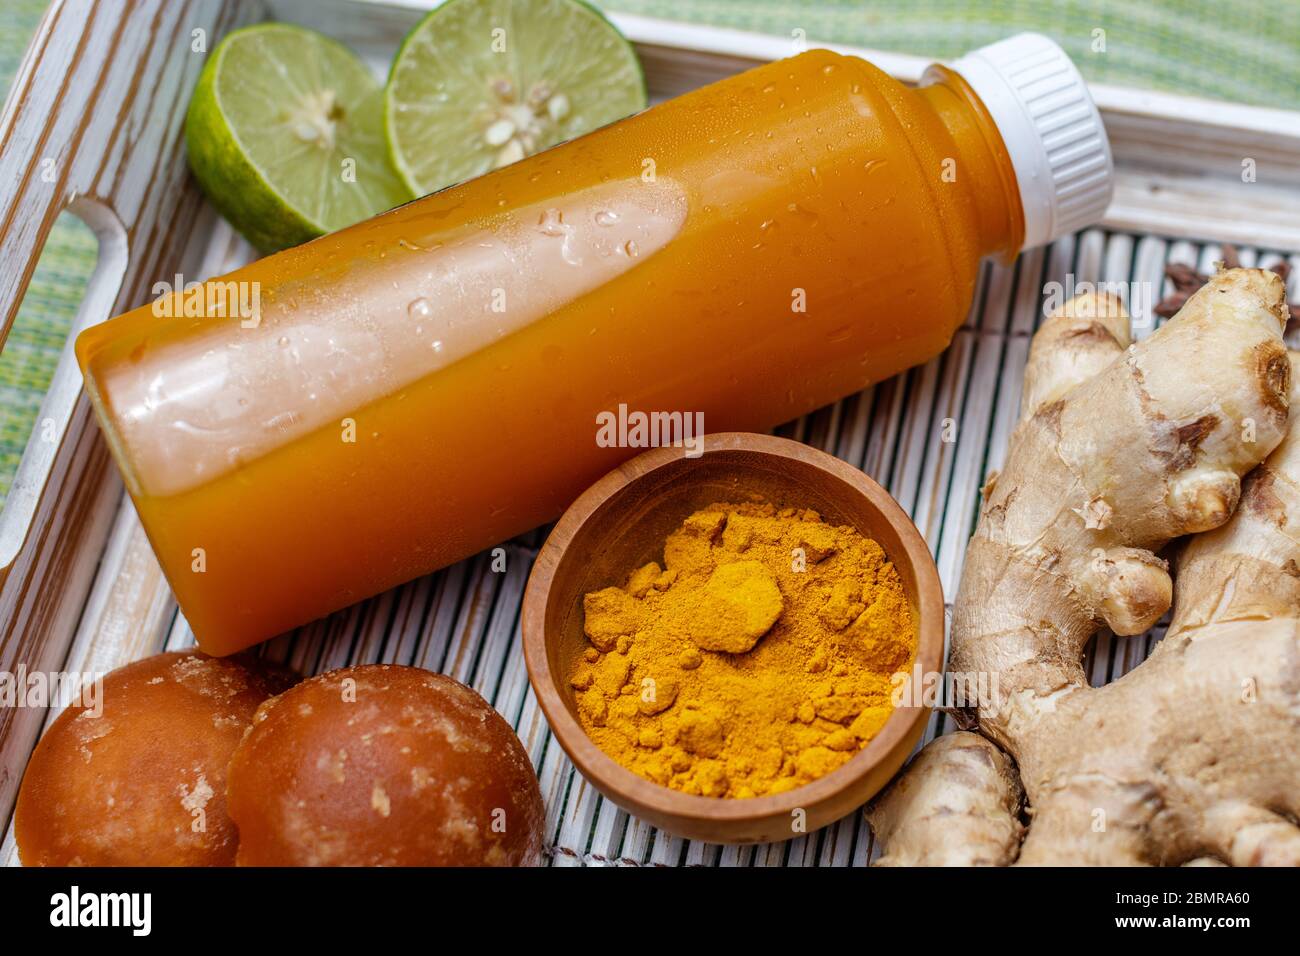 A bottle of Jamu 'Kunir Asam', traditional Indonesian herbal tonic medicine, with ingredients (ginger, turmeric, palm sugar). Bali, Indonesia. Stock Photo